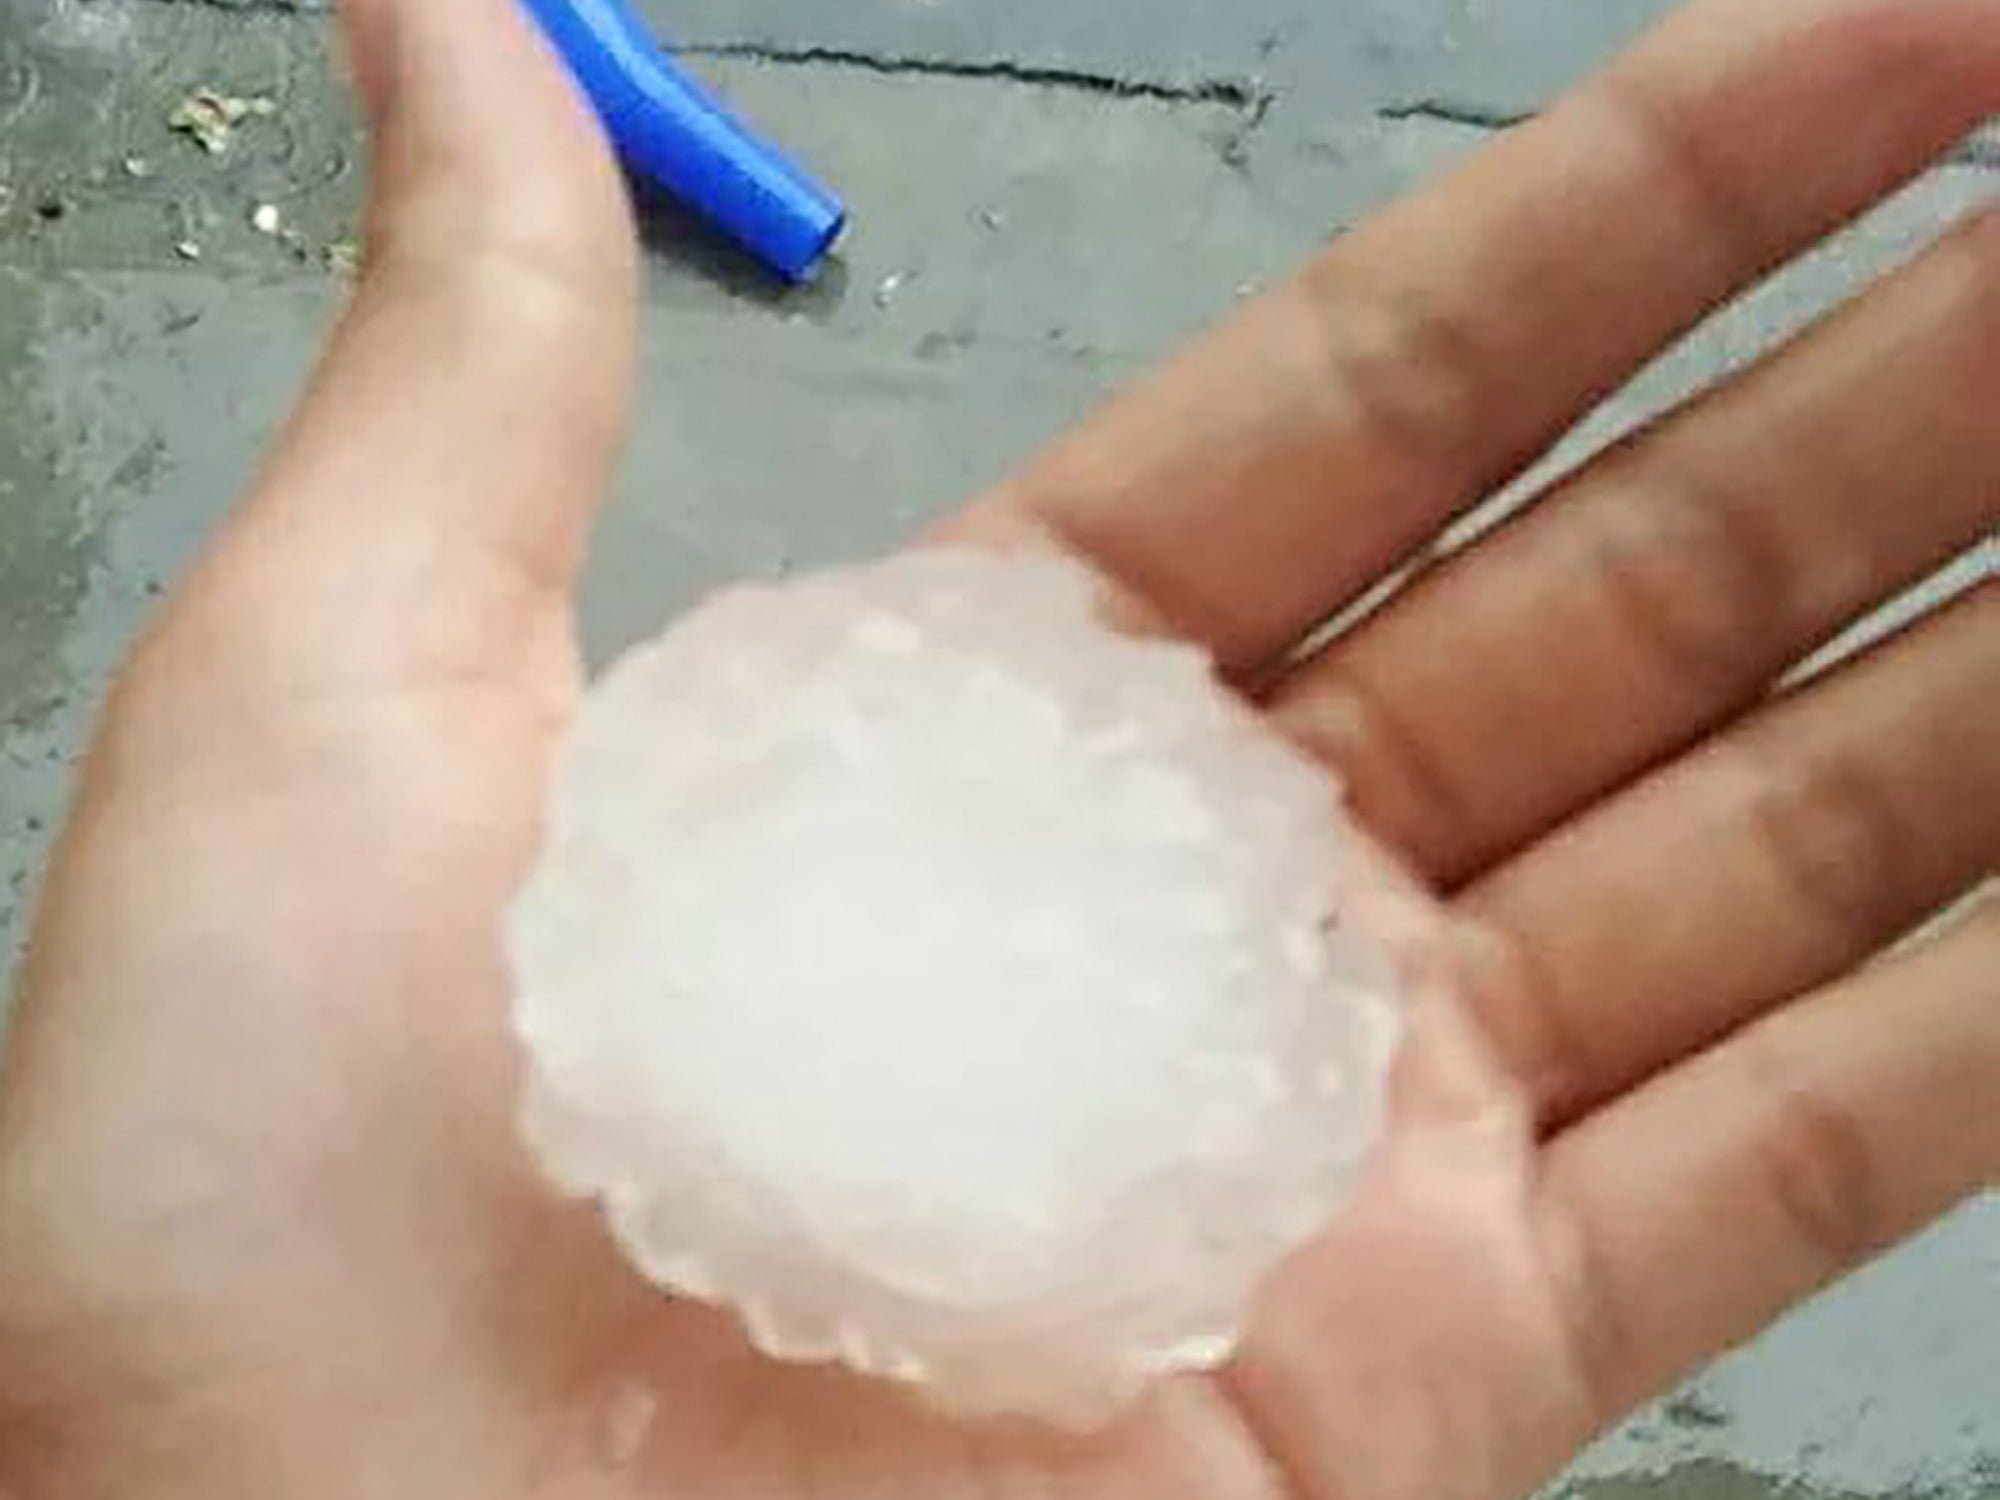 Huge hailstones rained down on the Chinese city of Qingdao